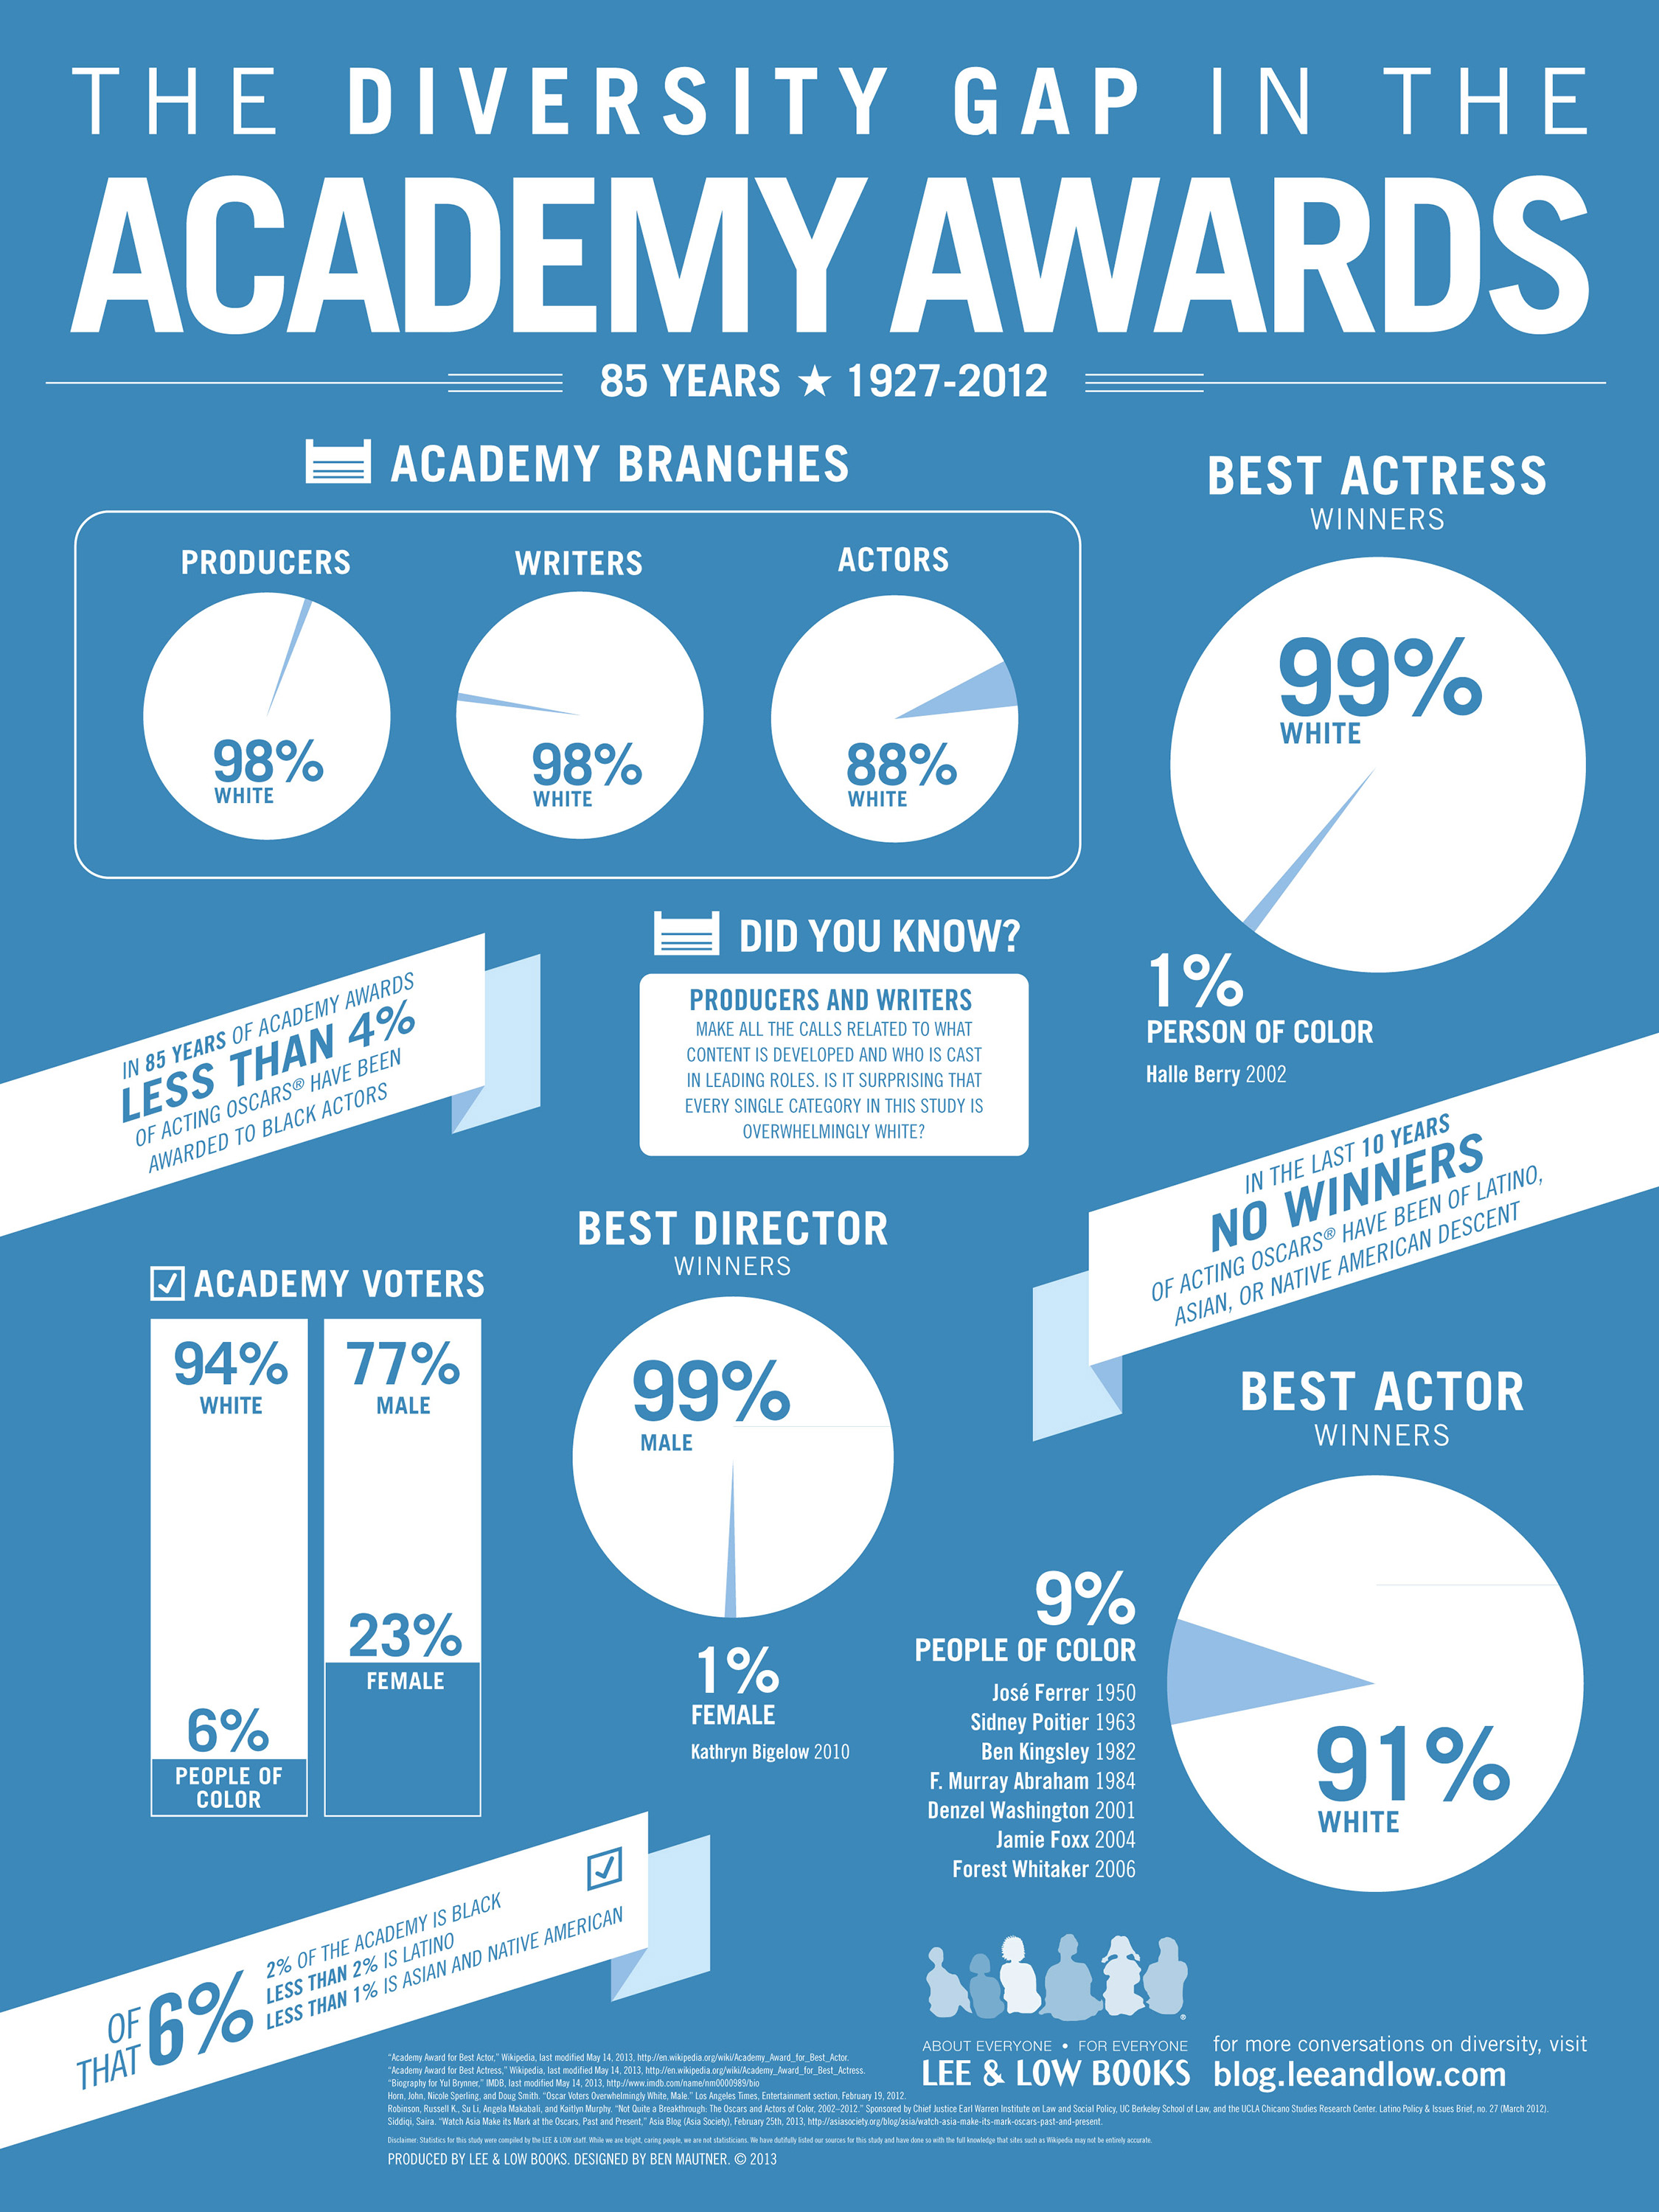 Academy Awards Diversity (or lack thereof) [Image Attribute: Lee & Low]